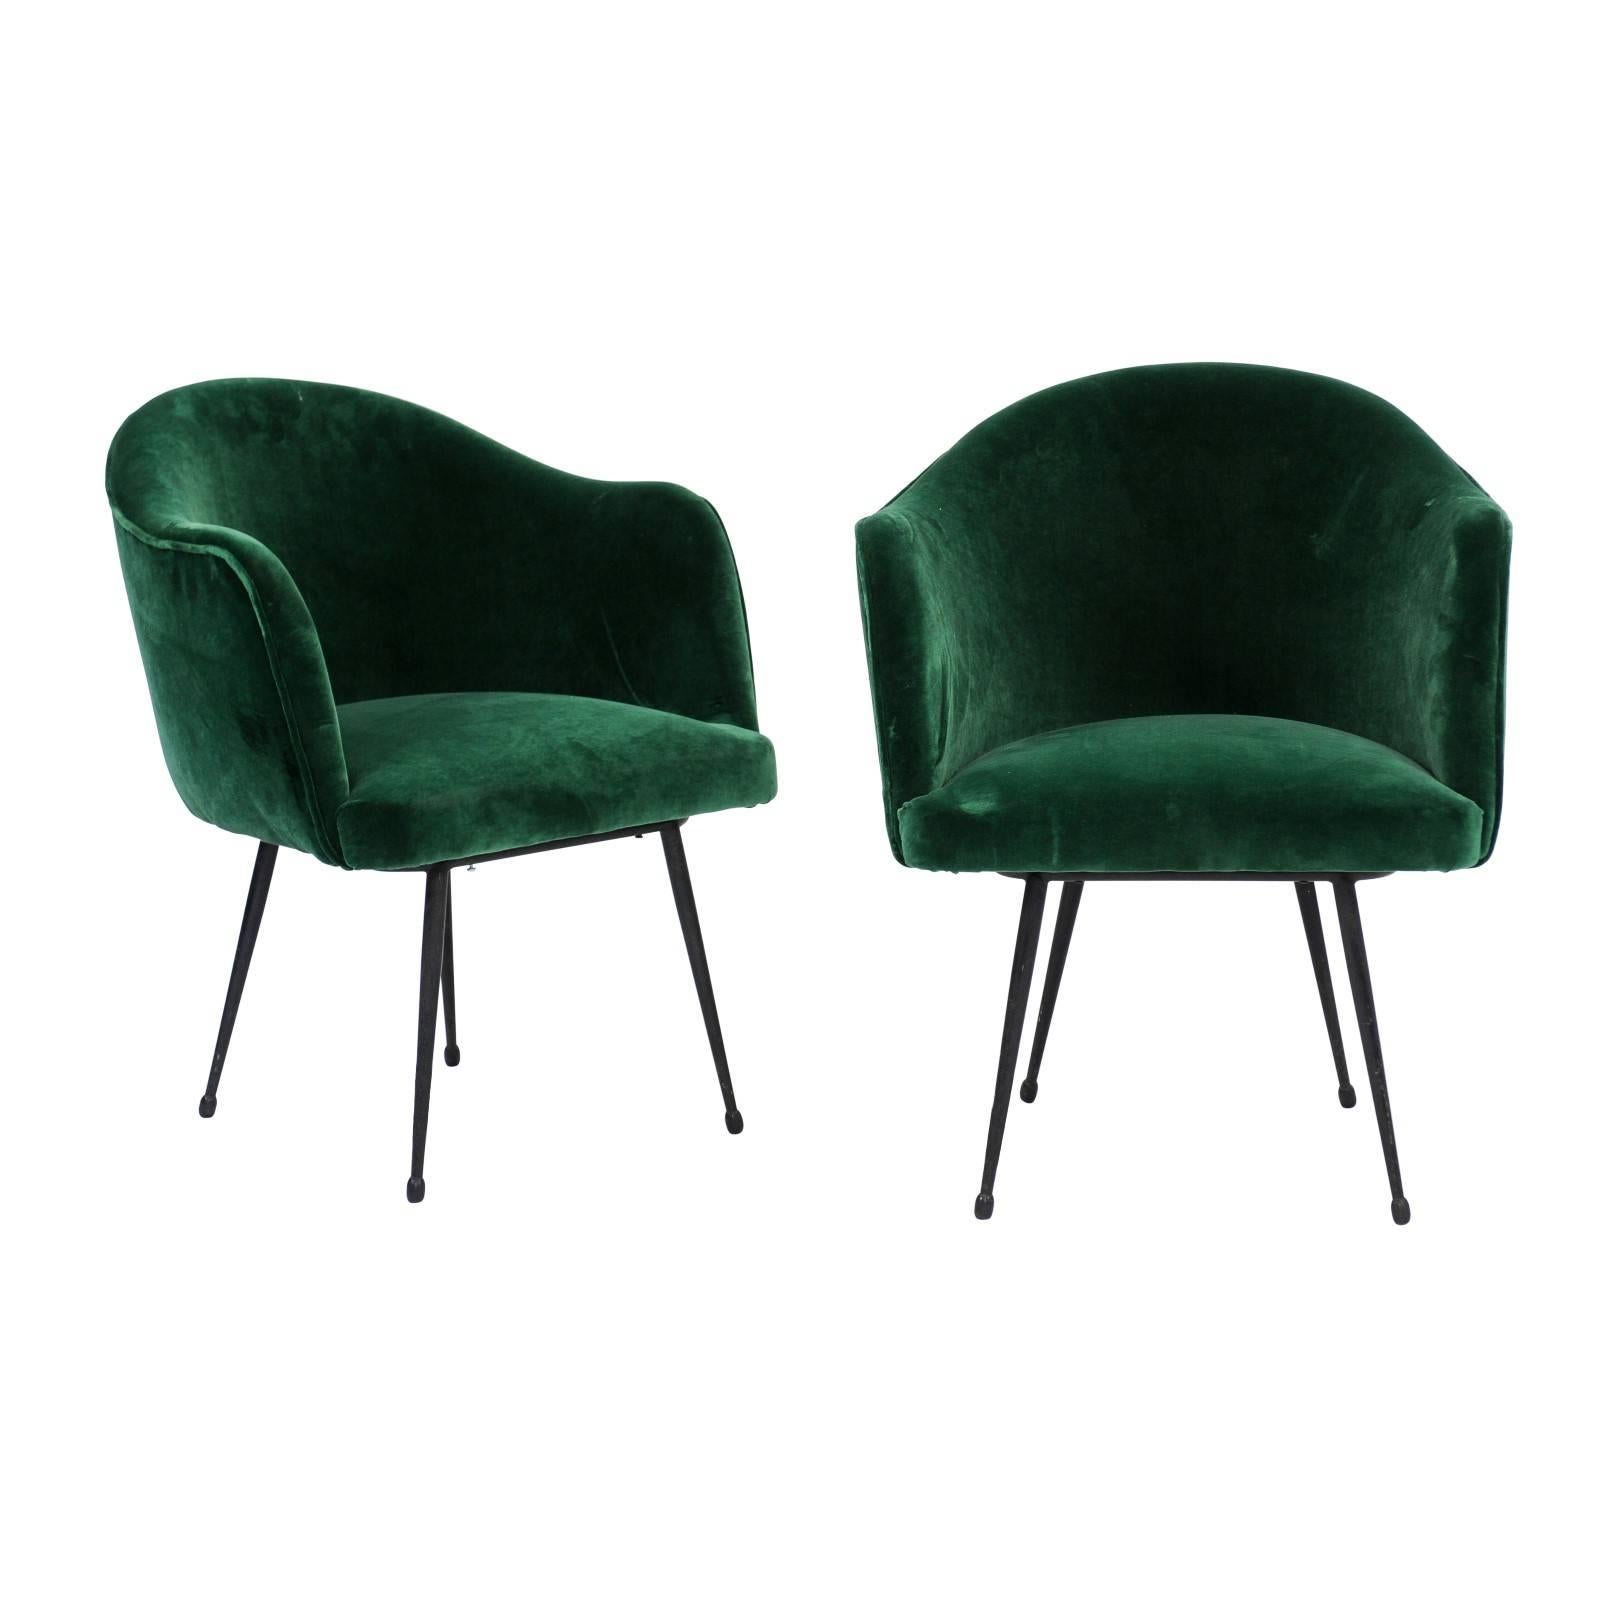 A pair of French 1970s green velvet upholstered tub chairs from the mid-20th century raised on four tubular splayed legs. There was just something about the vibrant – but sophisticated – green velvet of these charming chairs that caught our eye.